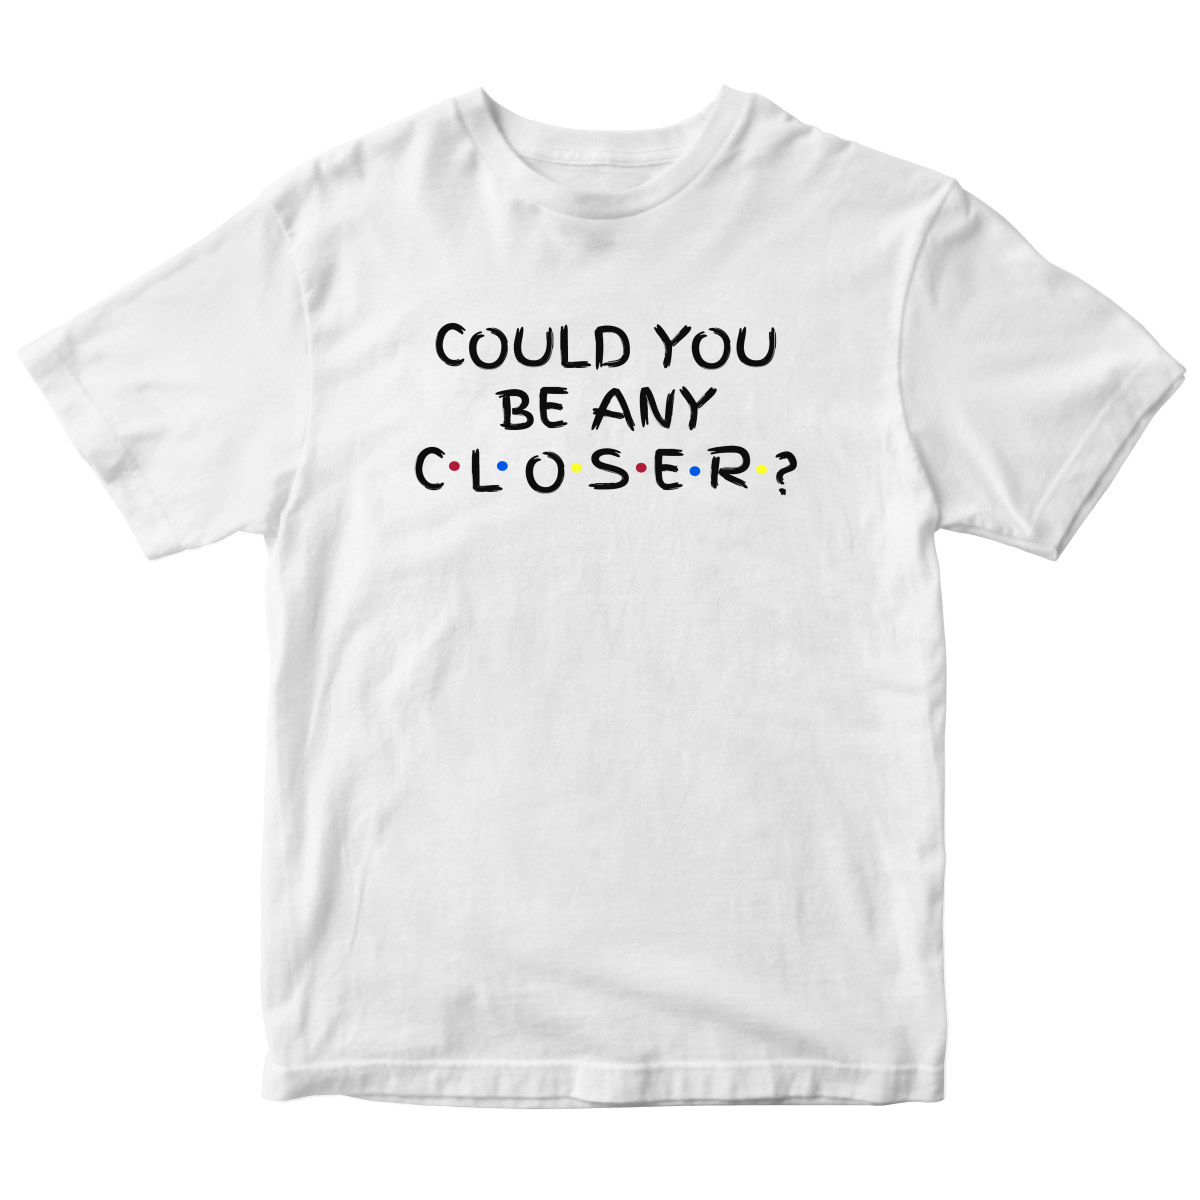 Could You Be Any Closer? Kids T-shirt | White